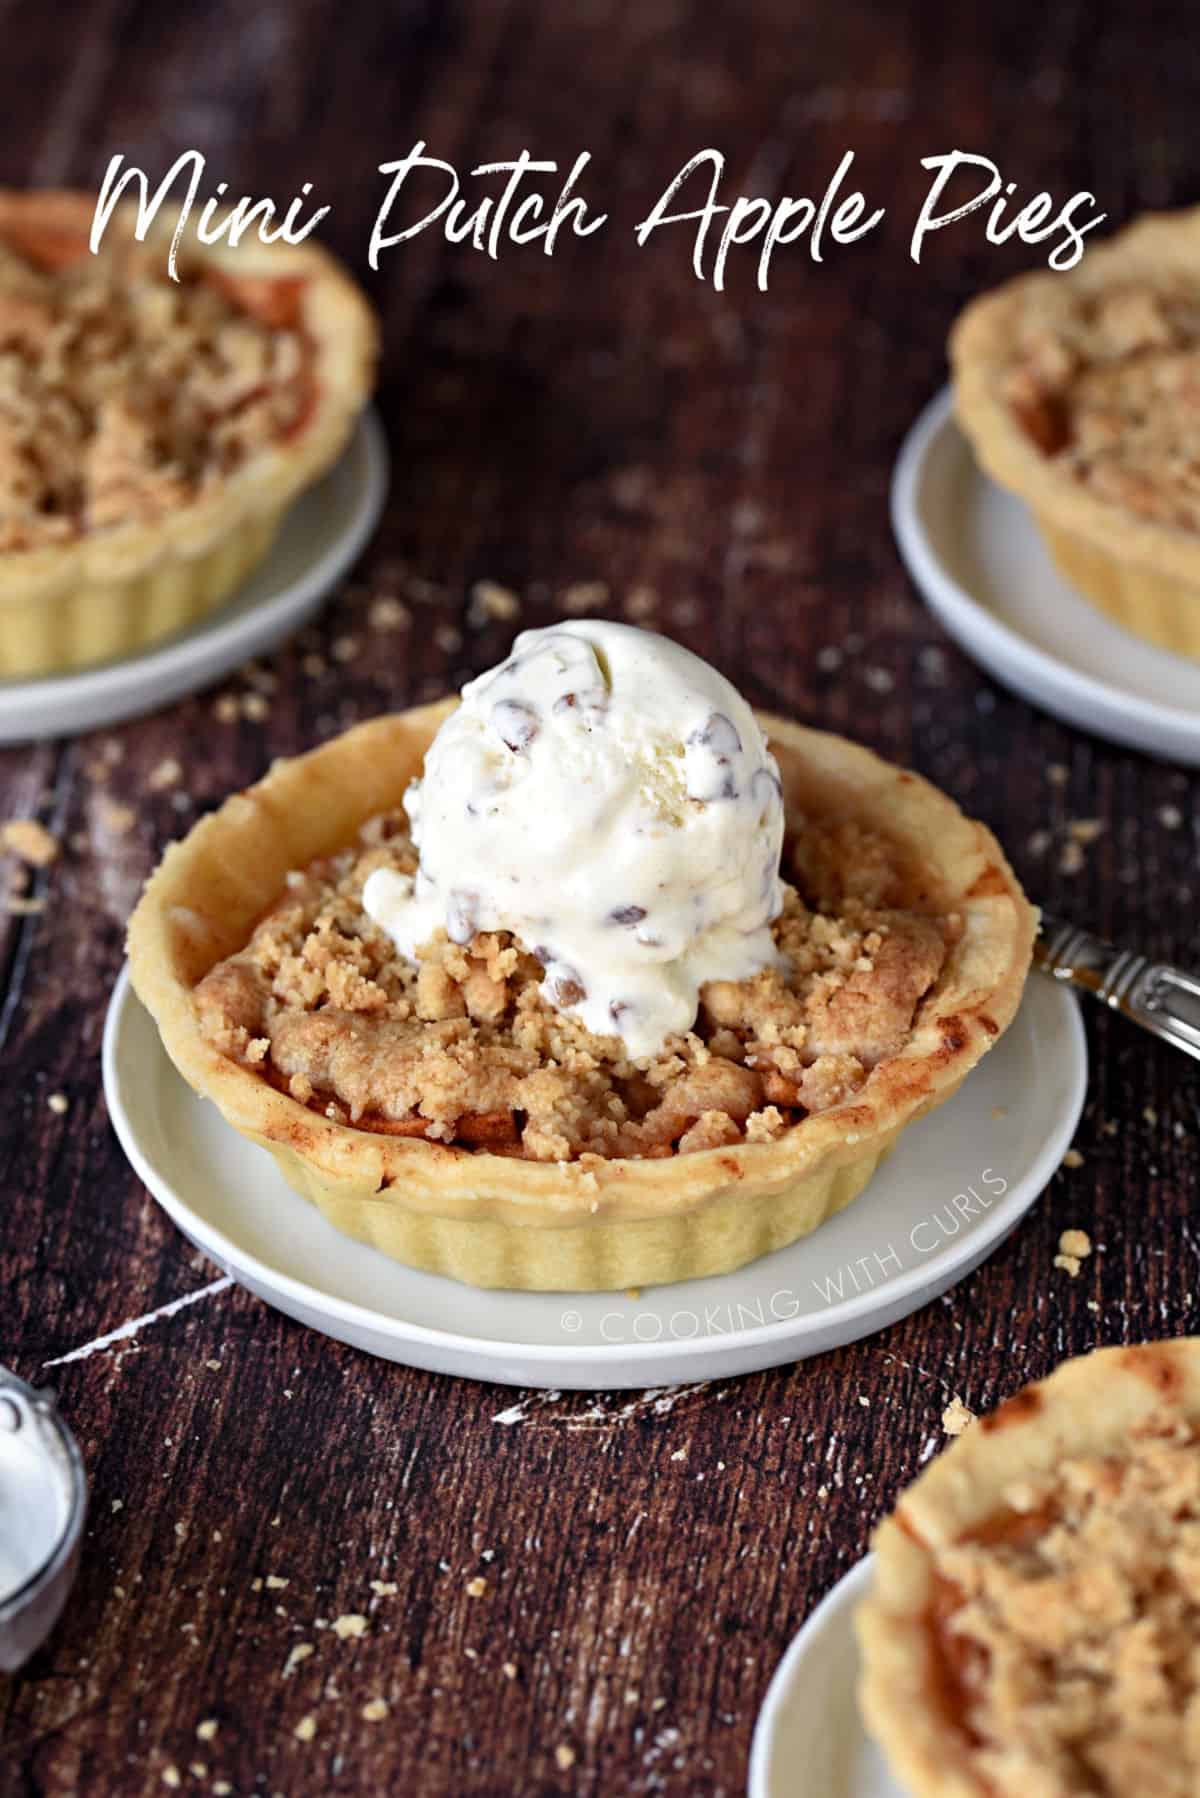 You Can Bake a Personal-Sized Pie for Dessert With This Mini Pie Maker